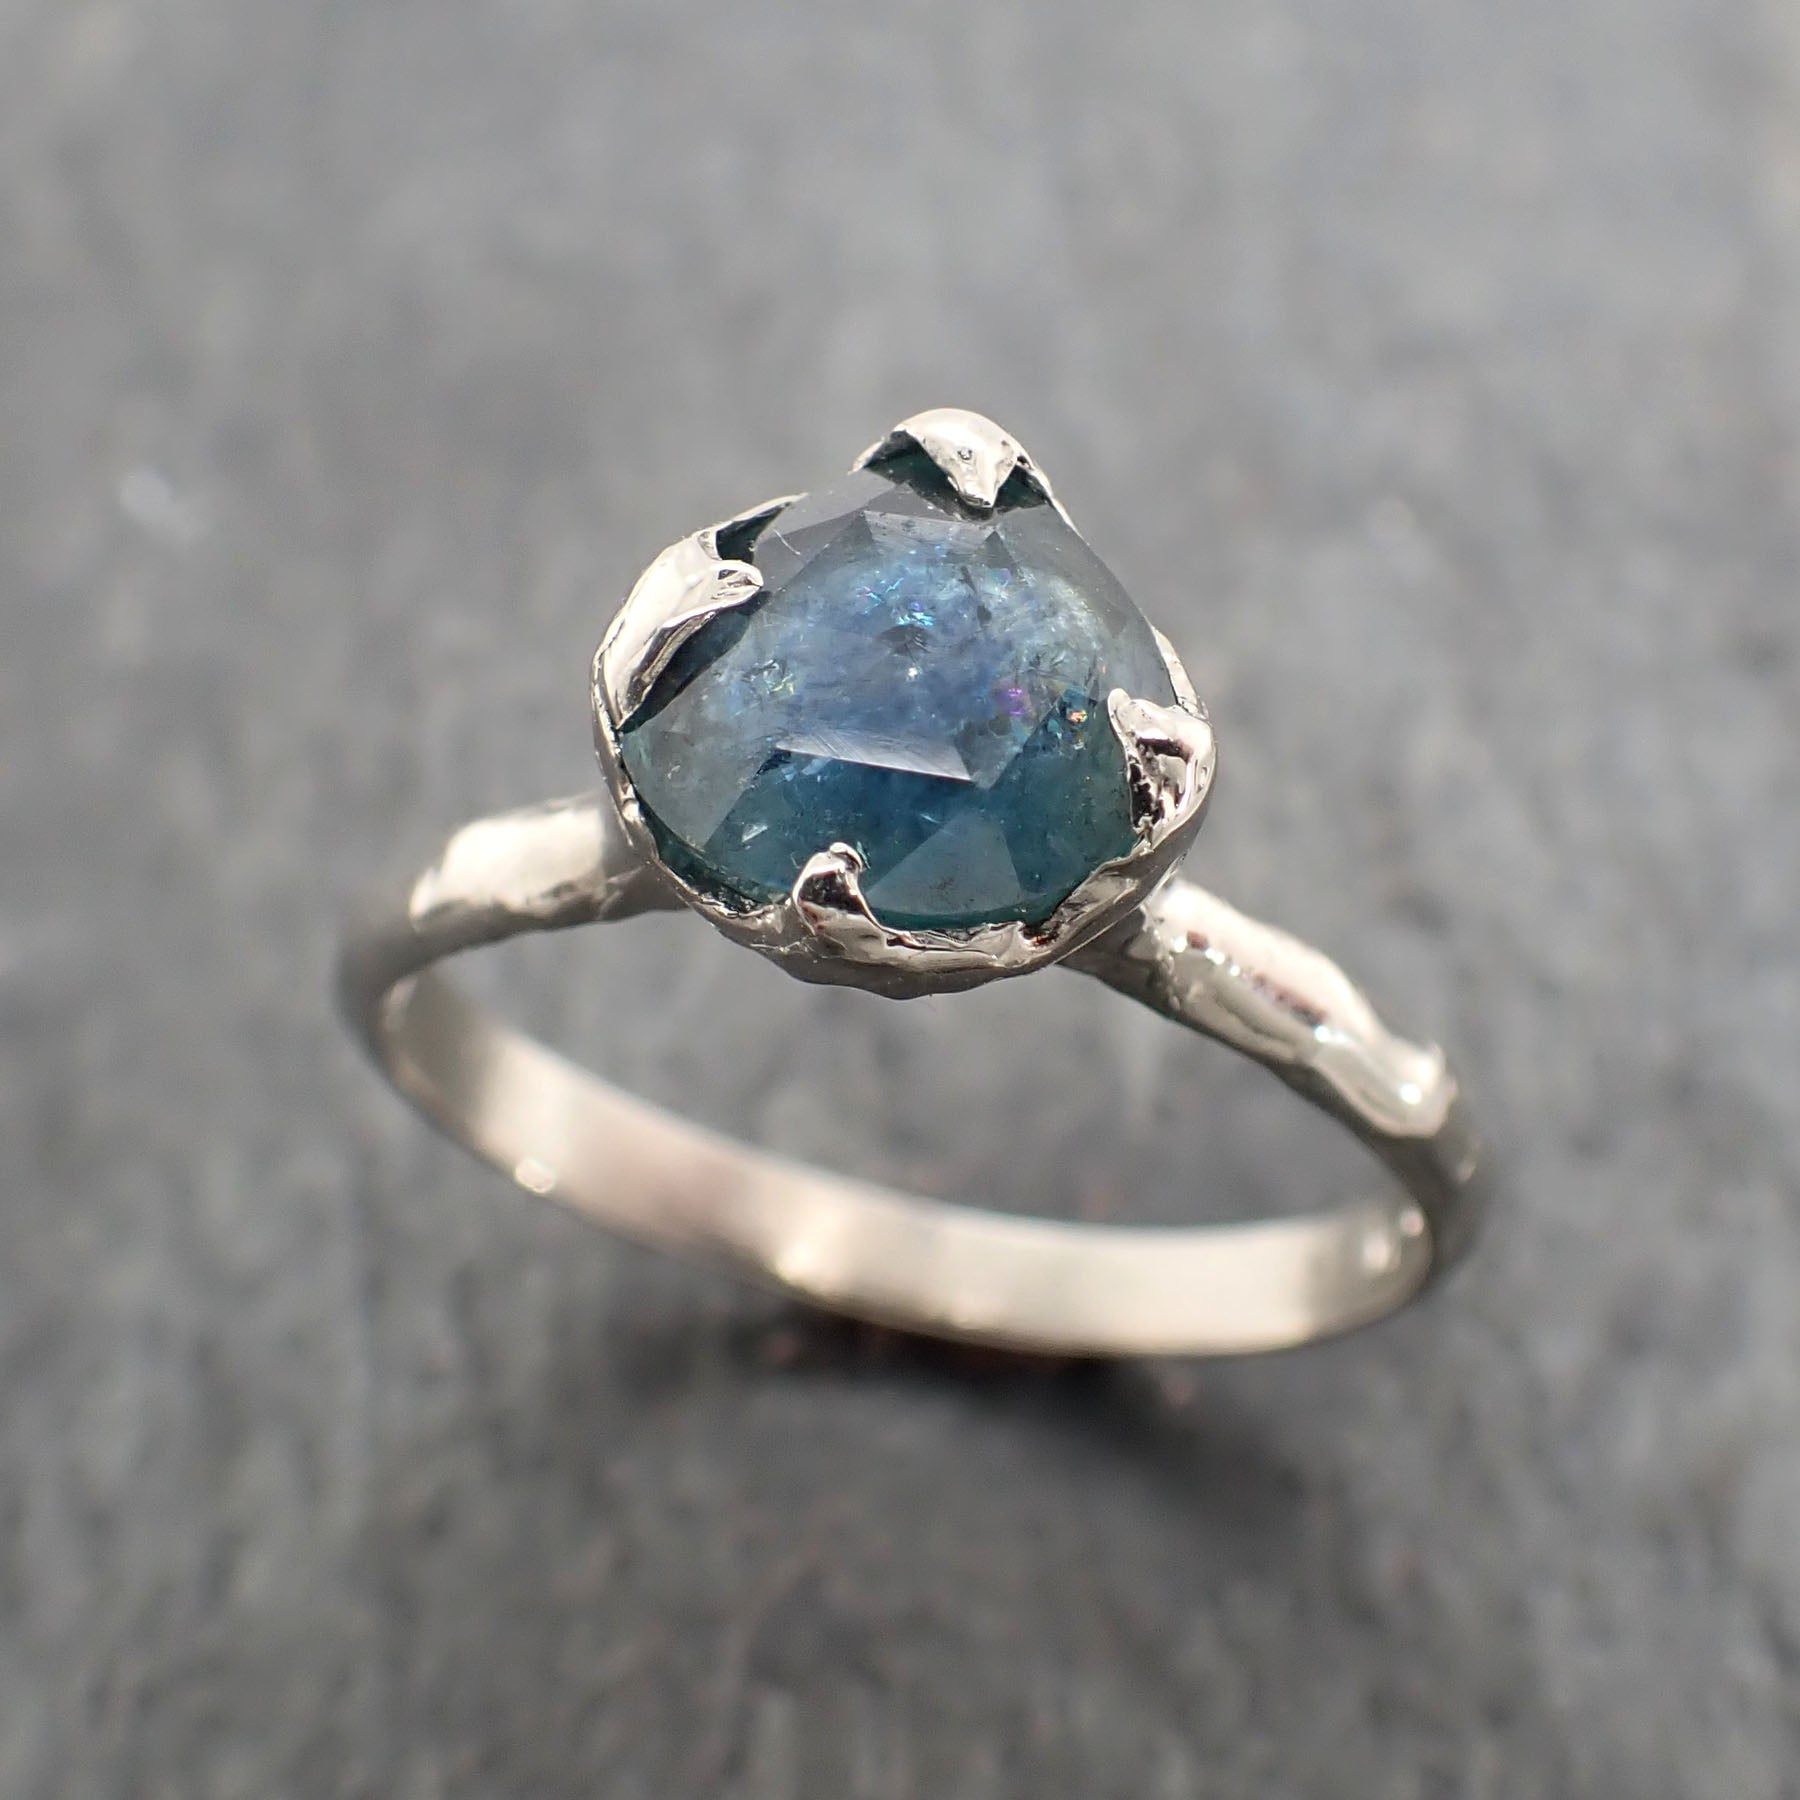 fancy cut montana blue sapphire 18k white gold solitaire ring gold gemstone engagement ring 2366 Alternative Engagement